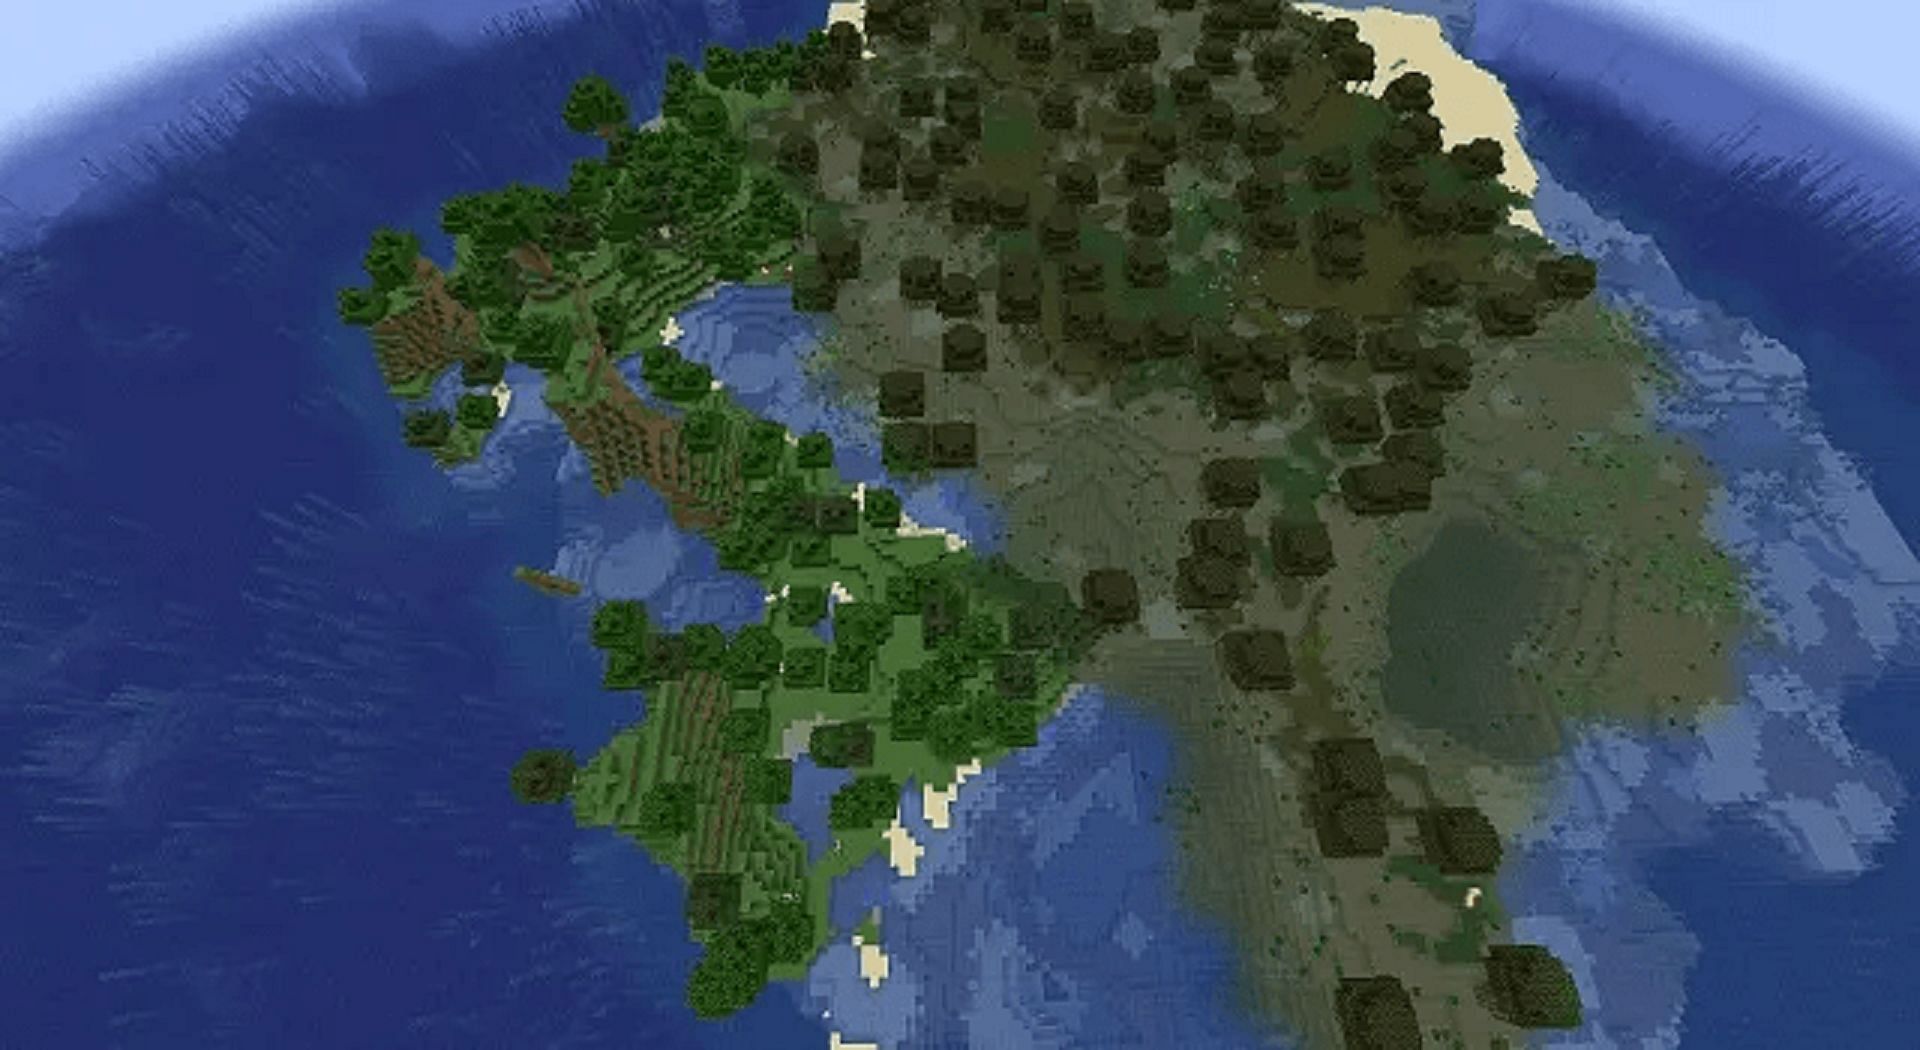 Players can explore a dual biome island s in this seed (Image via Mojang)